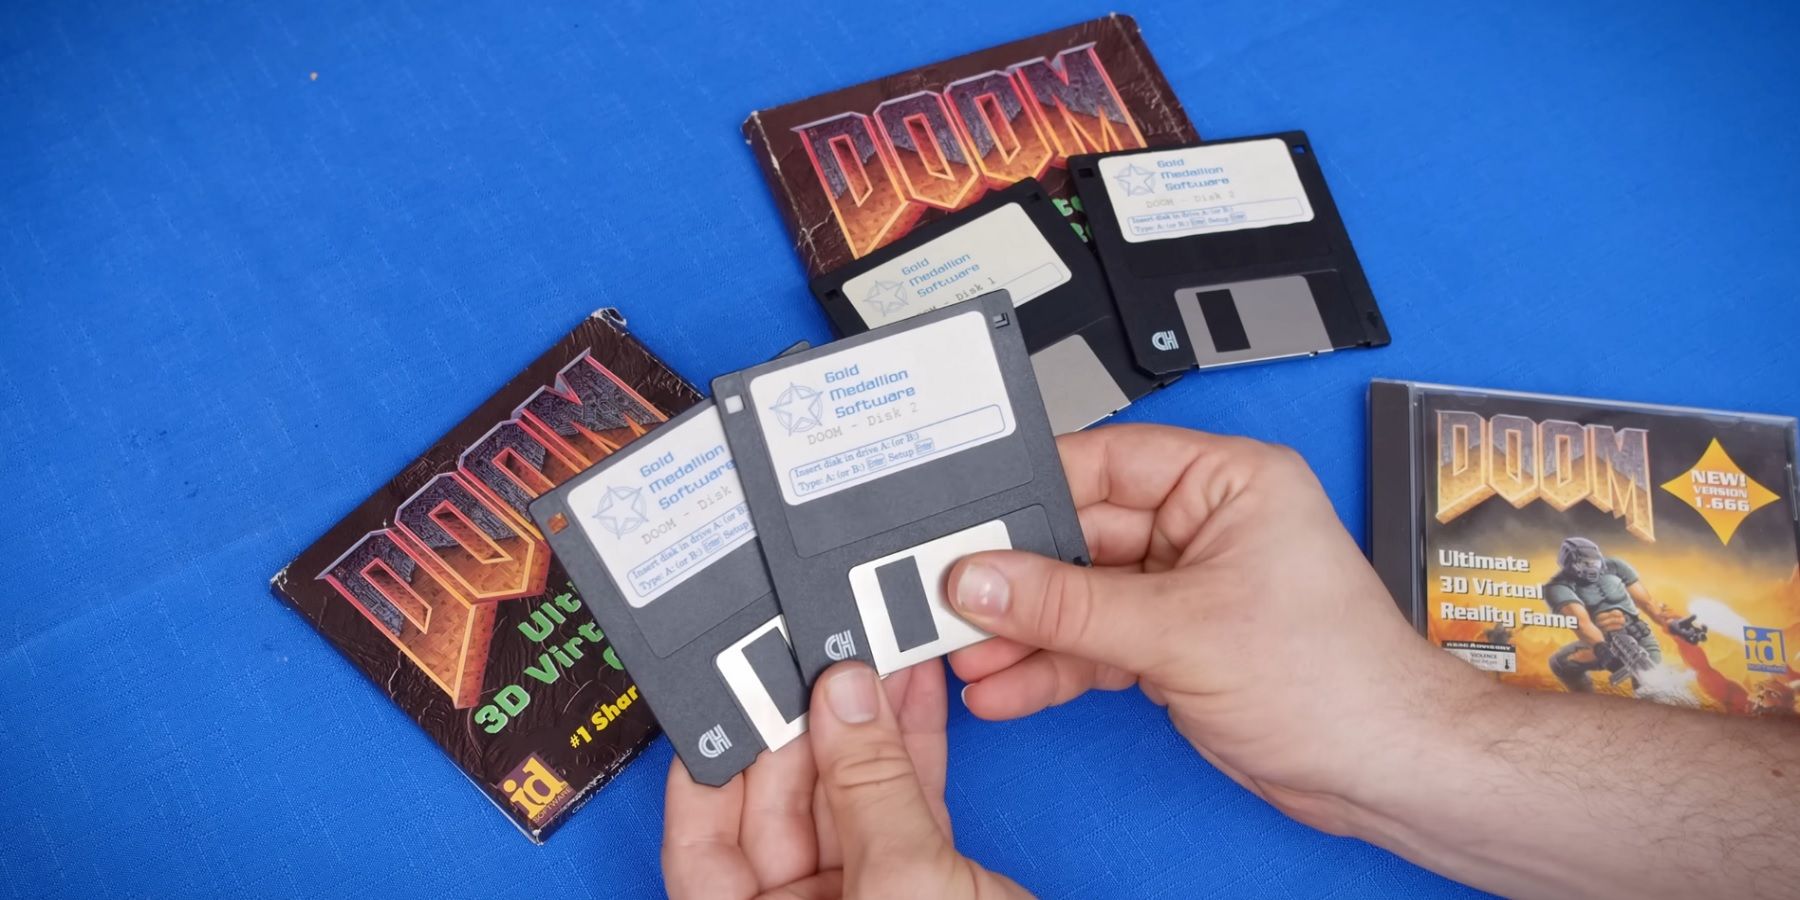 Doom Fan Gets Multi Monitor Version of Game to Run on 4 DOS
PCs